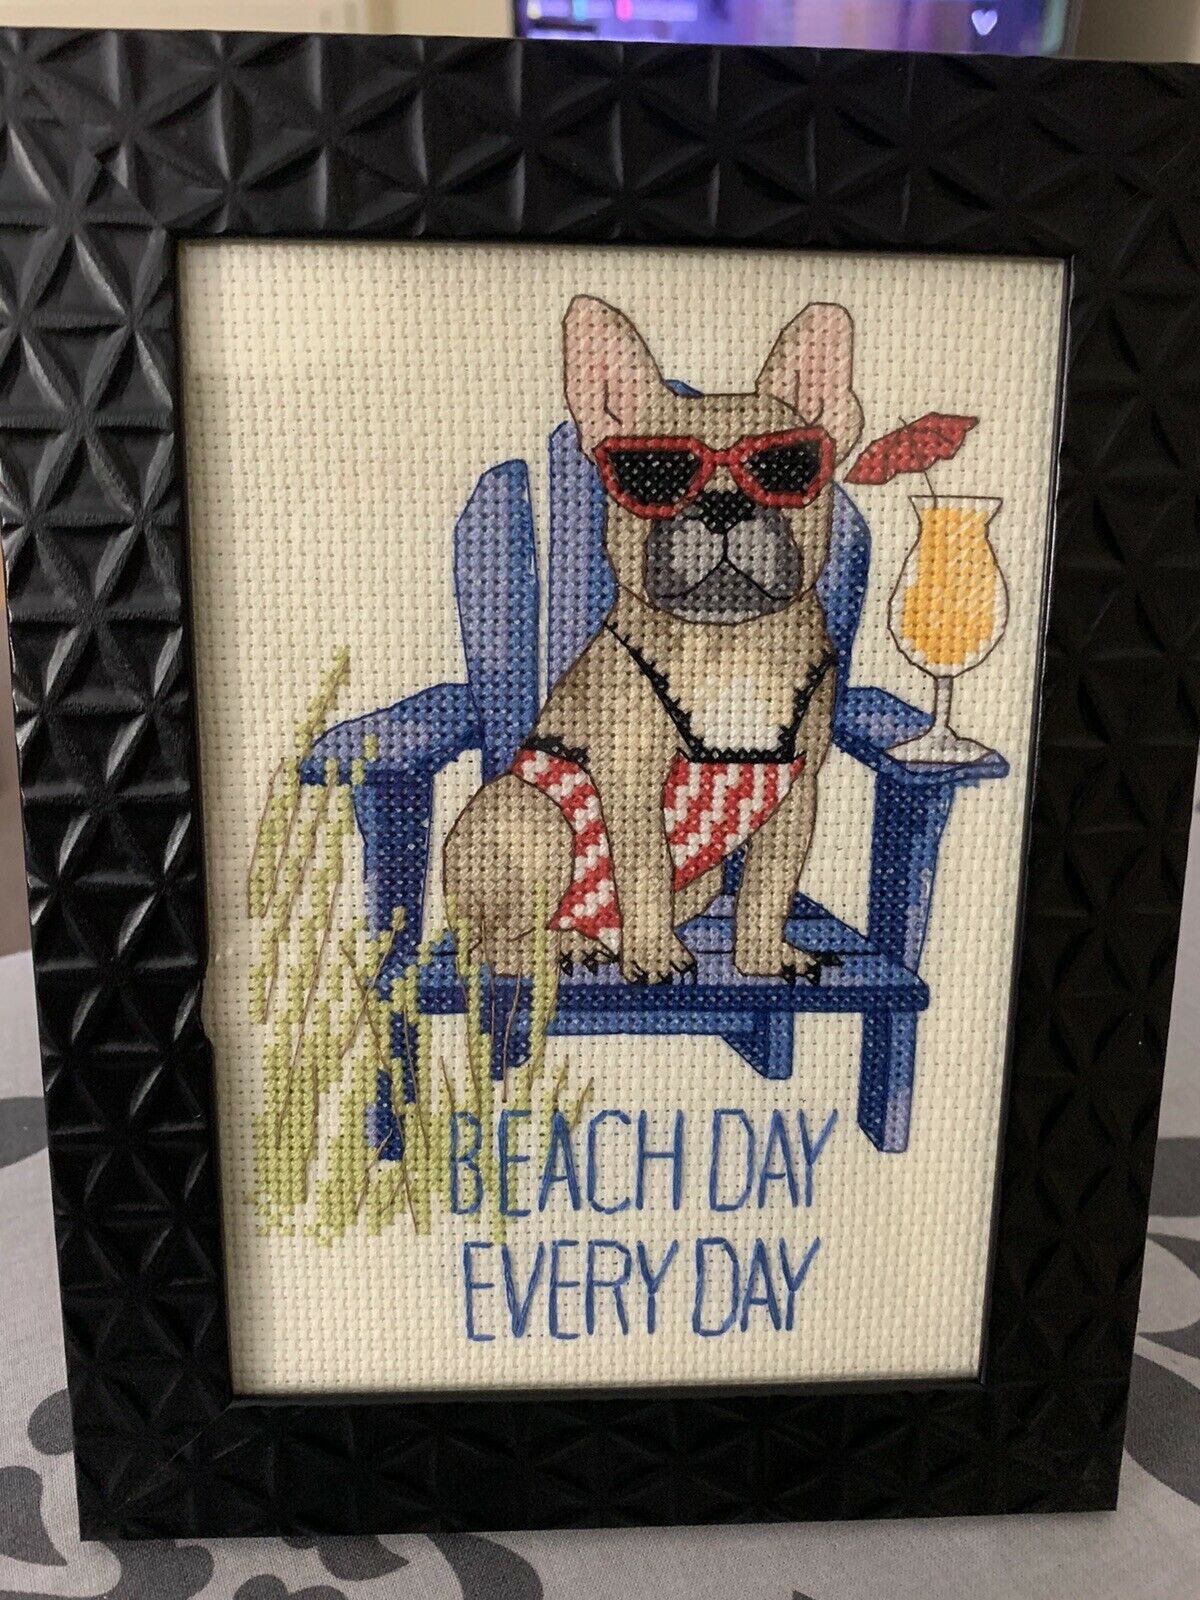 Completed Finished Beach Day Dog 5 X 7 Framed Cross Stitch